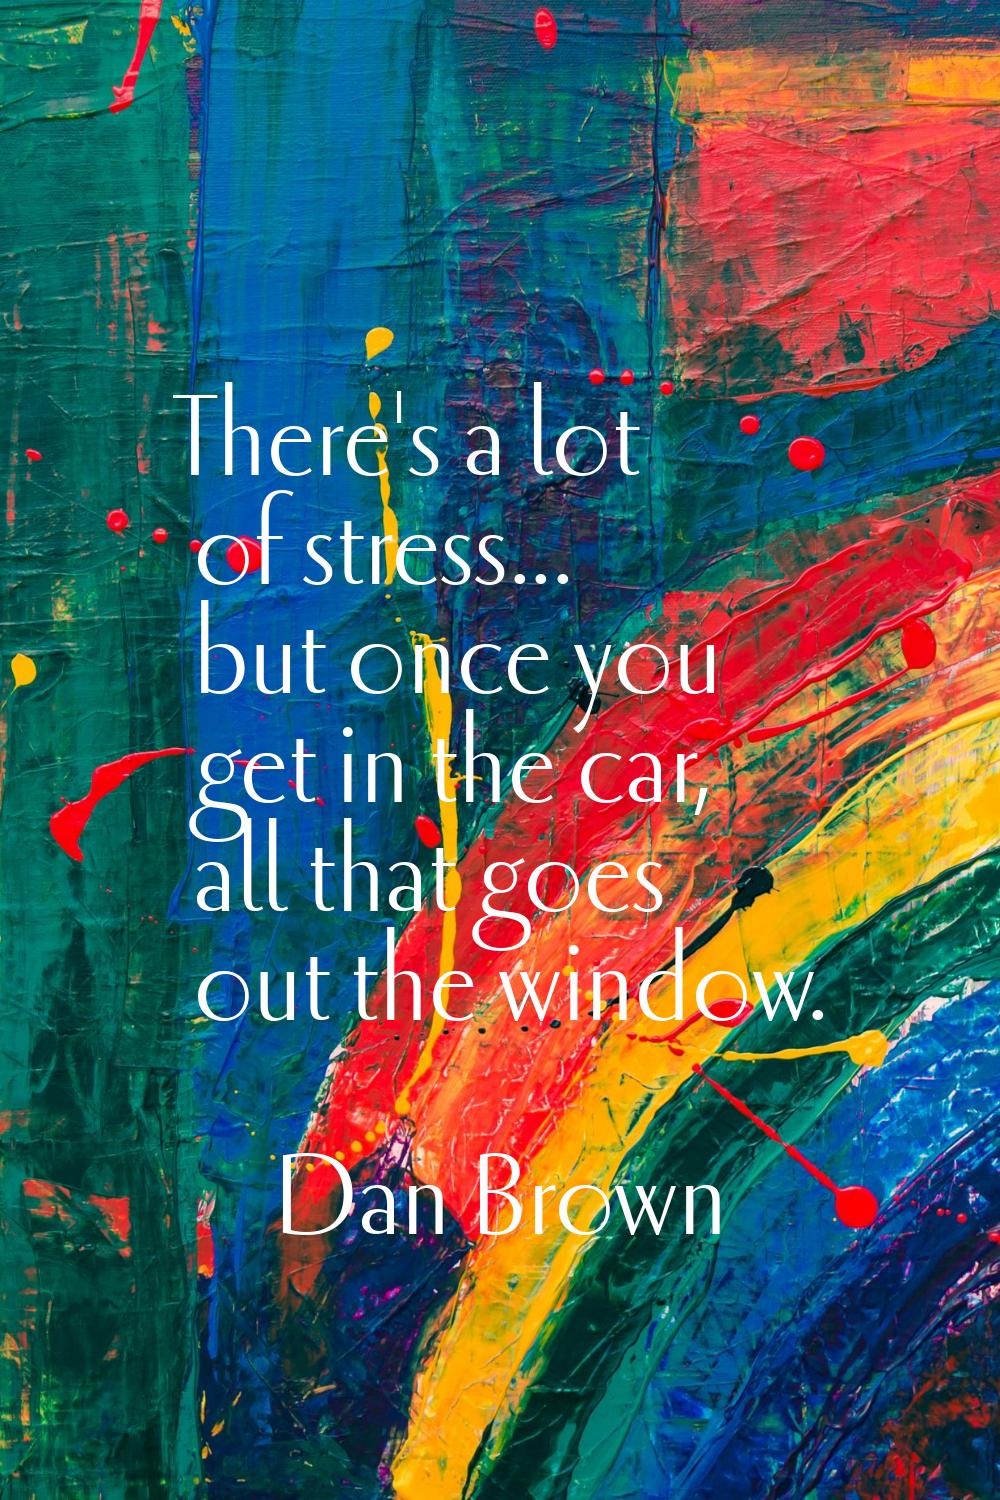 There's a lot of stress... but once you get in the car, all that goes out the window.